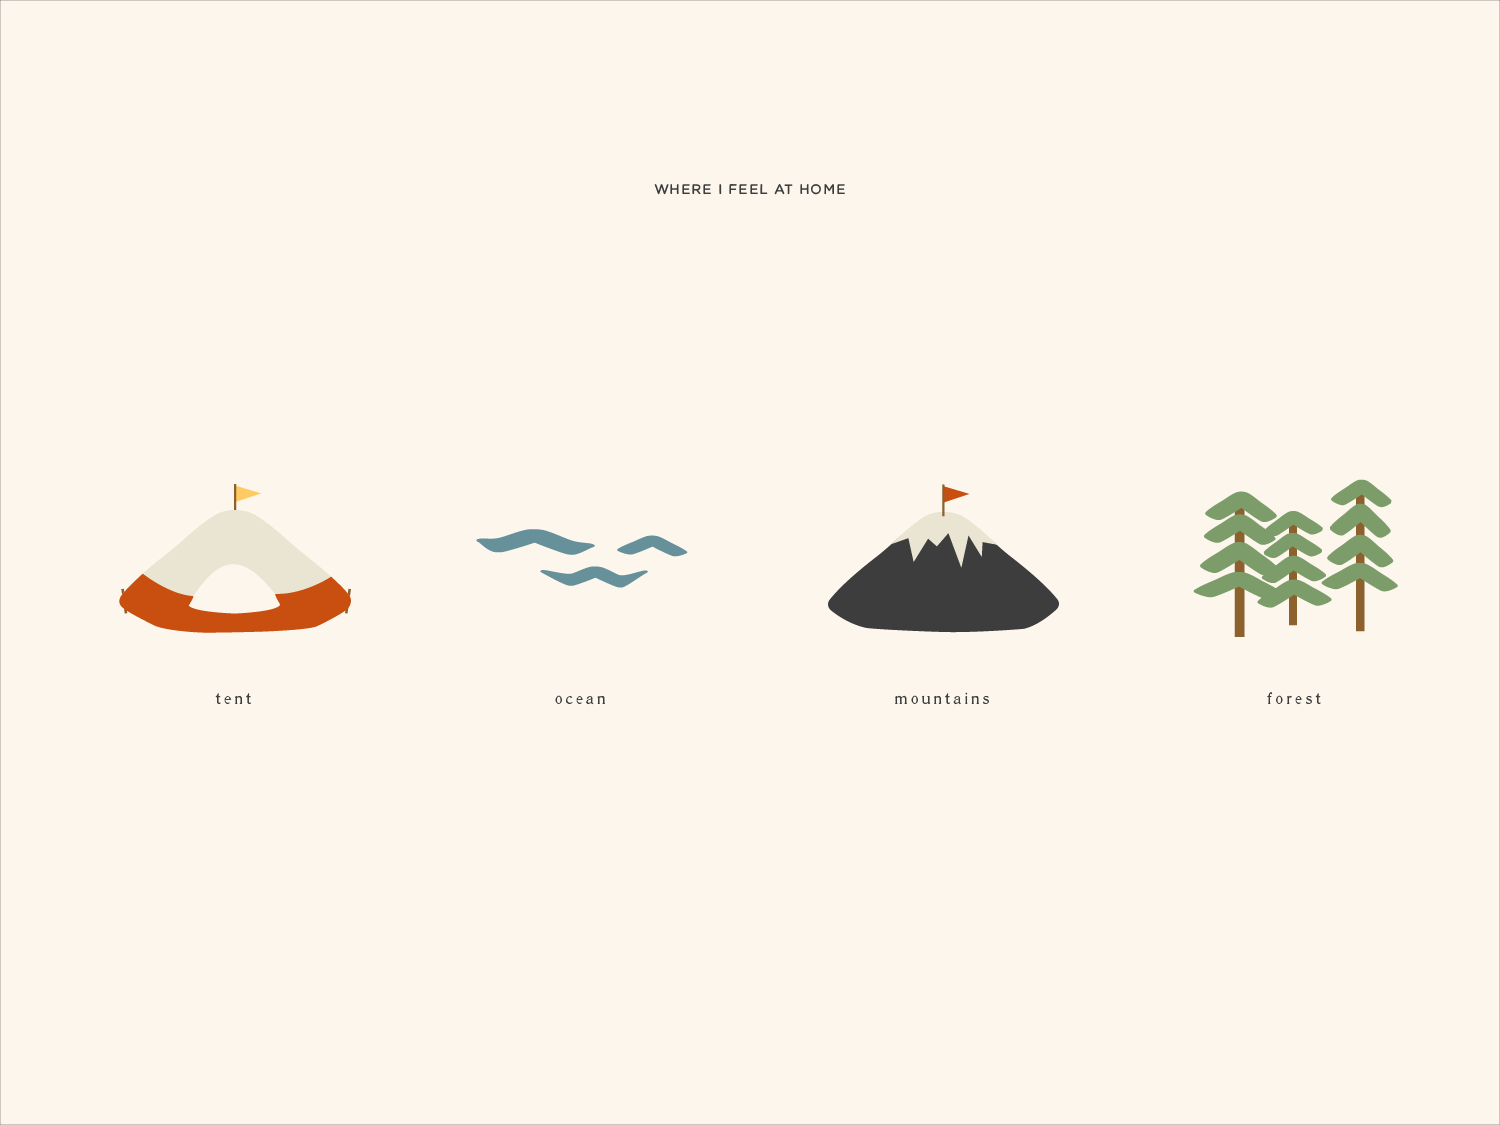 Four illustrations created highlighting different outdoor areas including a tent, the ocean, the mountains and the forest.